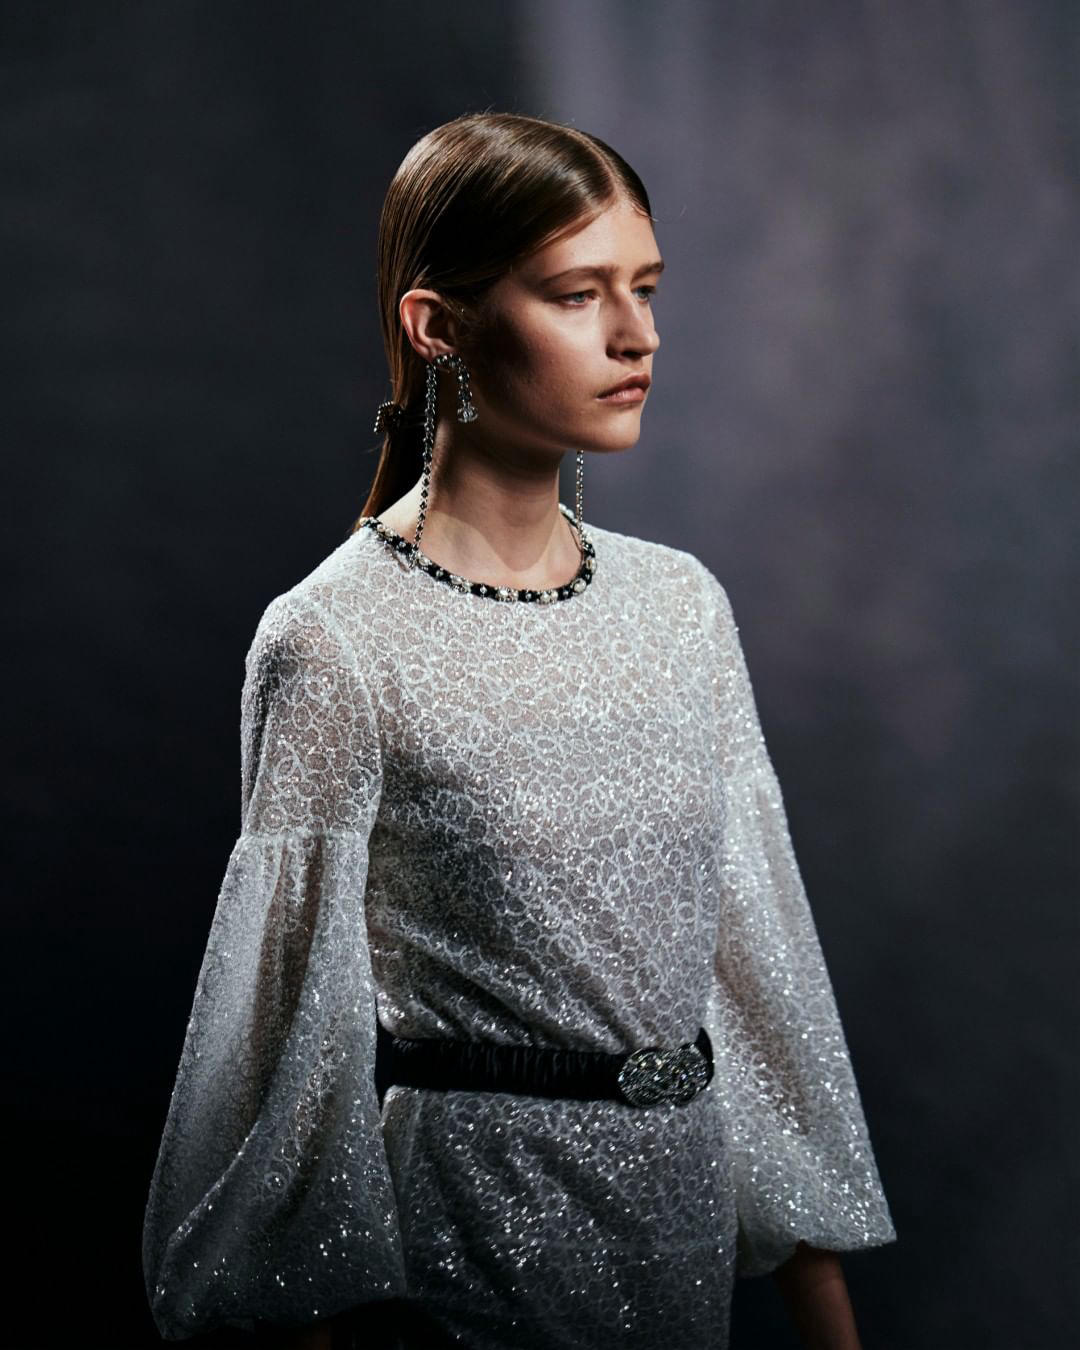 The silhouette of a flounced evening dress with floating sleeves glitters with a delicate graphic su